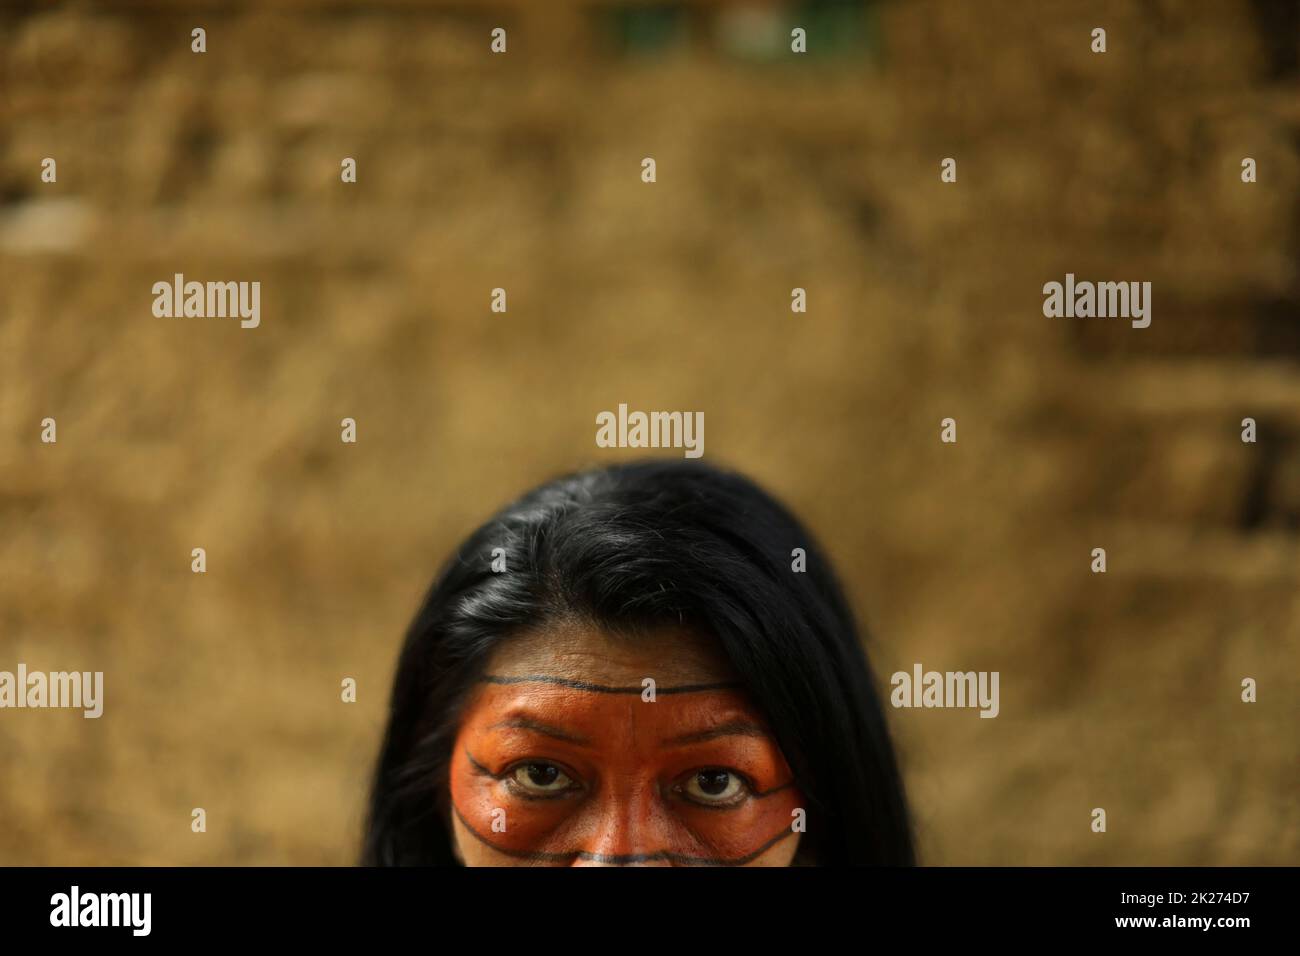 Tereza Arapium, from the Arapium indigenous people, candidate for Rio de Janeiro state deputy for the Rede Sustentabilidade party, poses for a photo at the Aldeia Maracana in Rio de Janeiro, Brazil September 22, 2022. REUTERS/Pilar Olivares Stock Photo